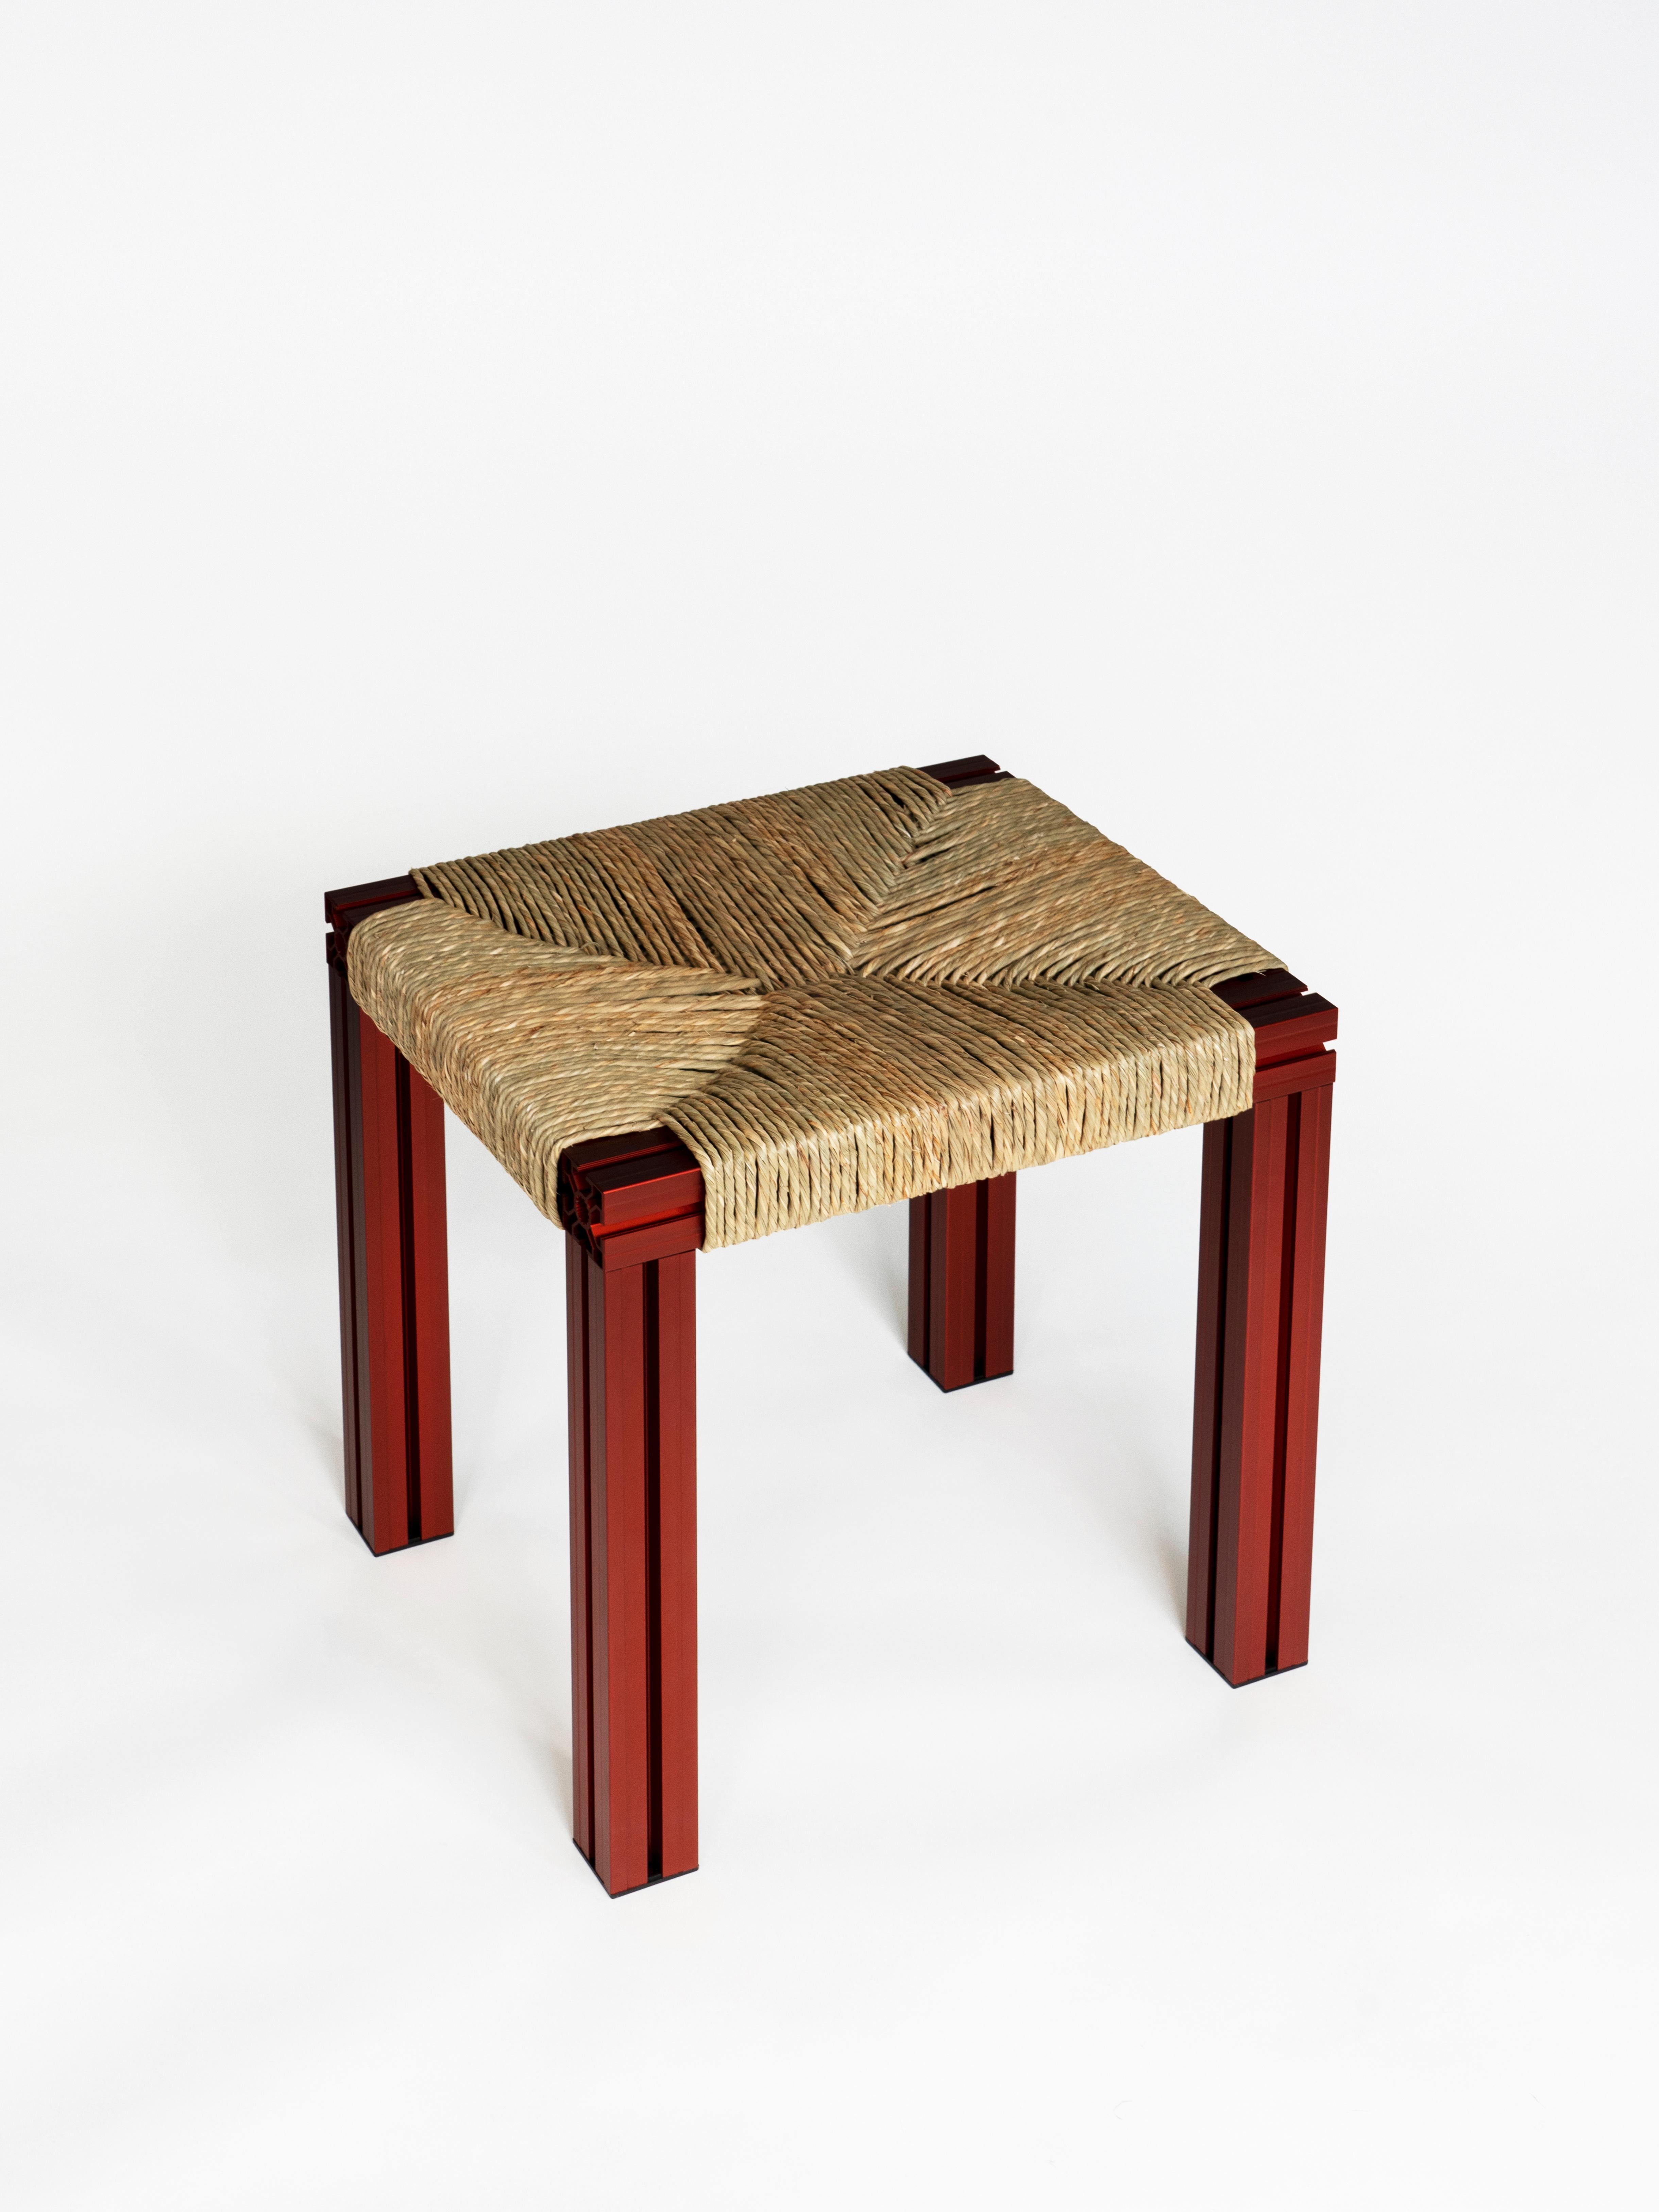 Post-Modern Anodized Burgundy and Rush Weave Wicker Stool by Tino Seubert For Sale